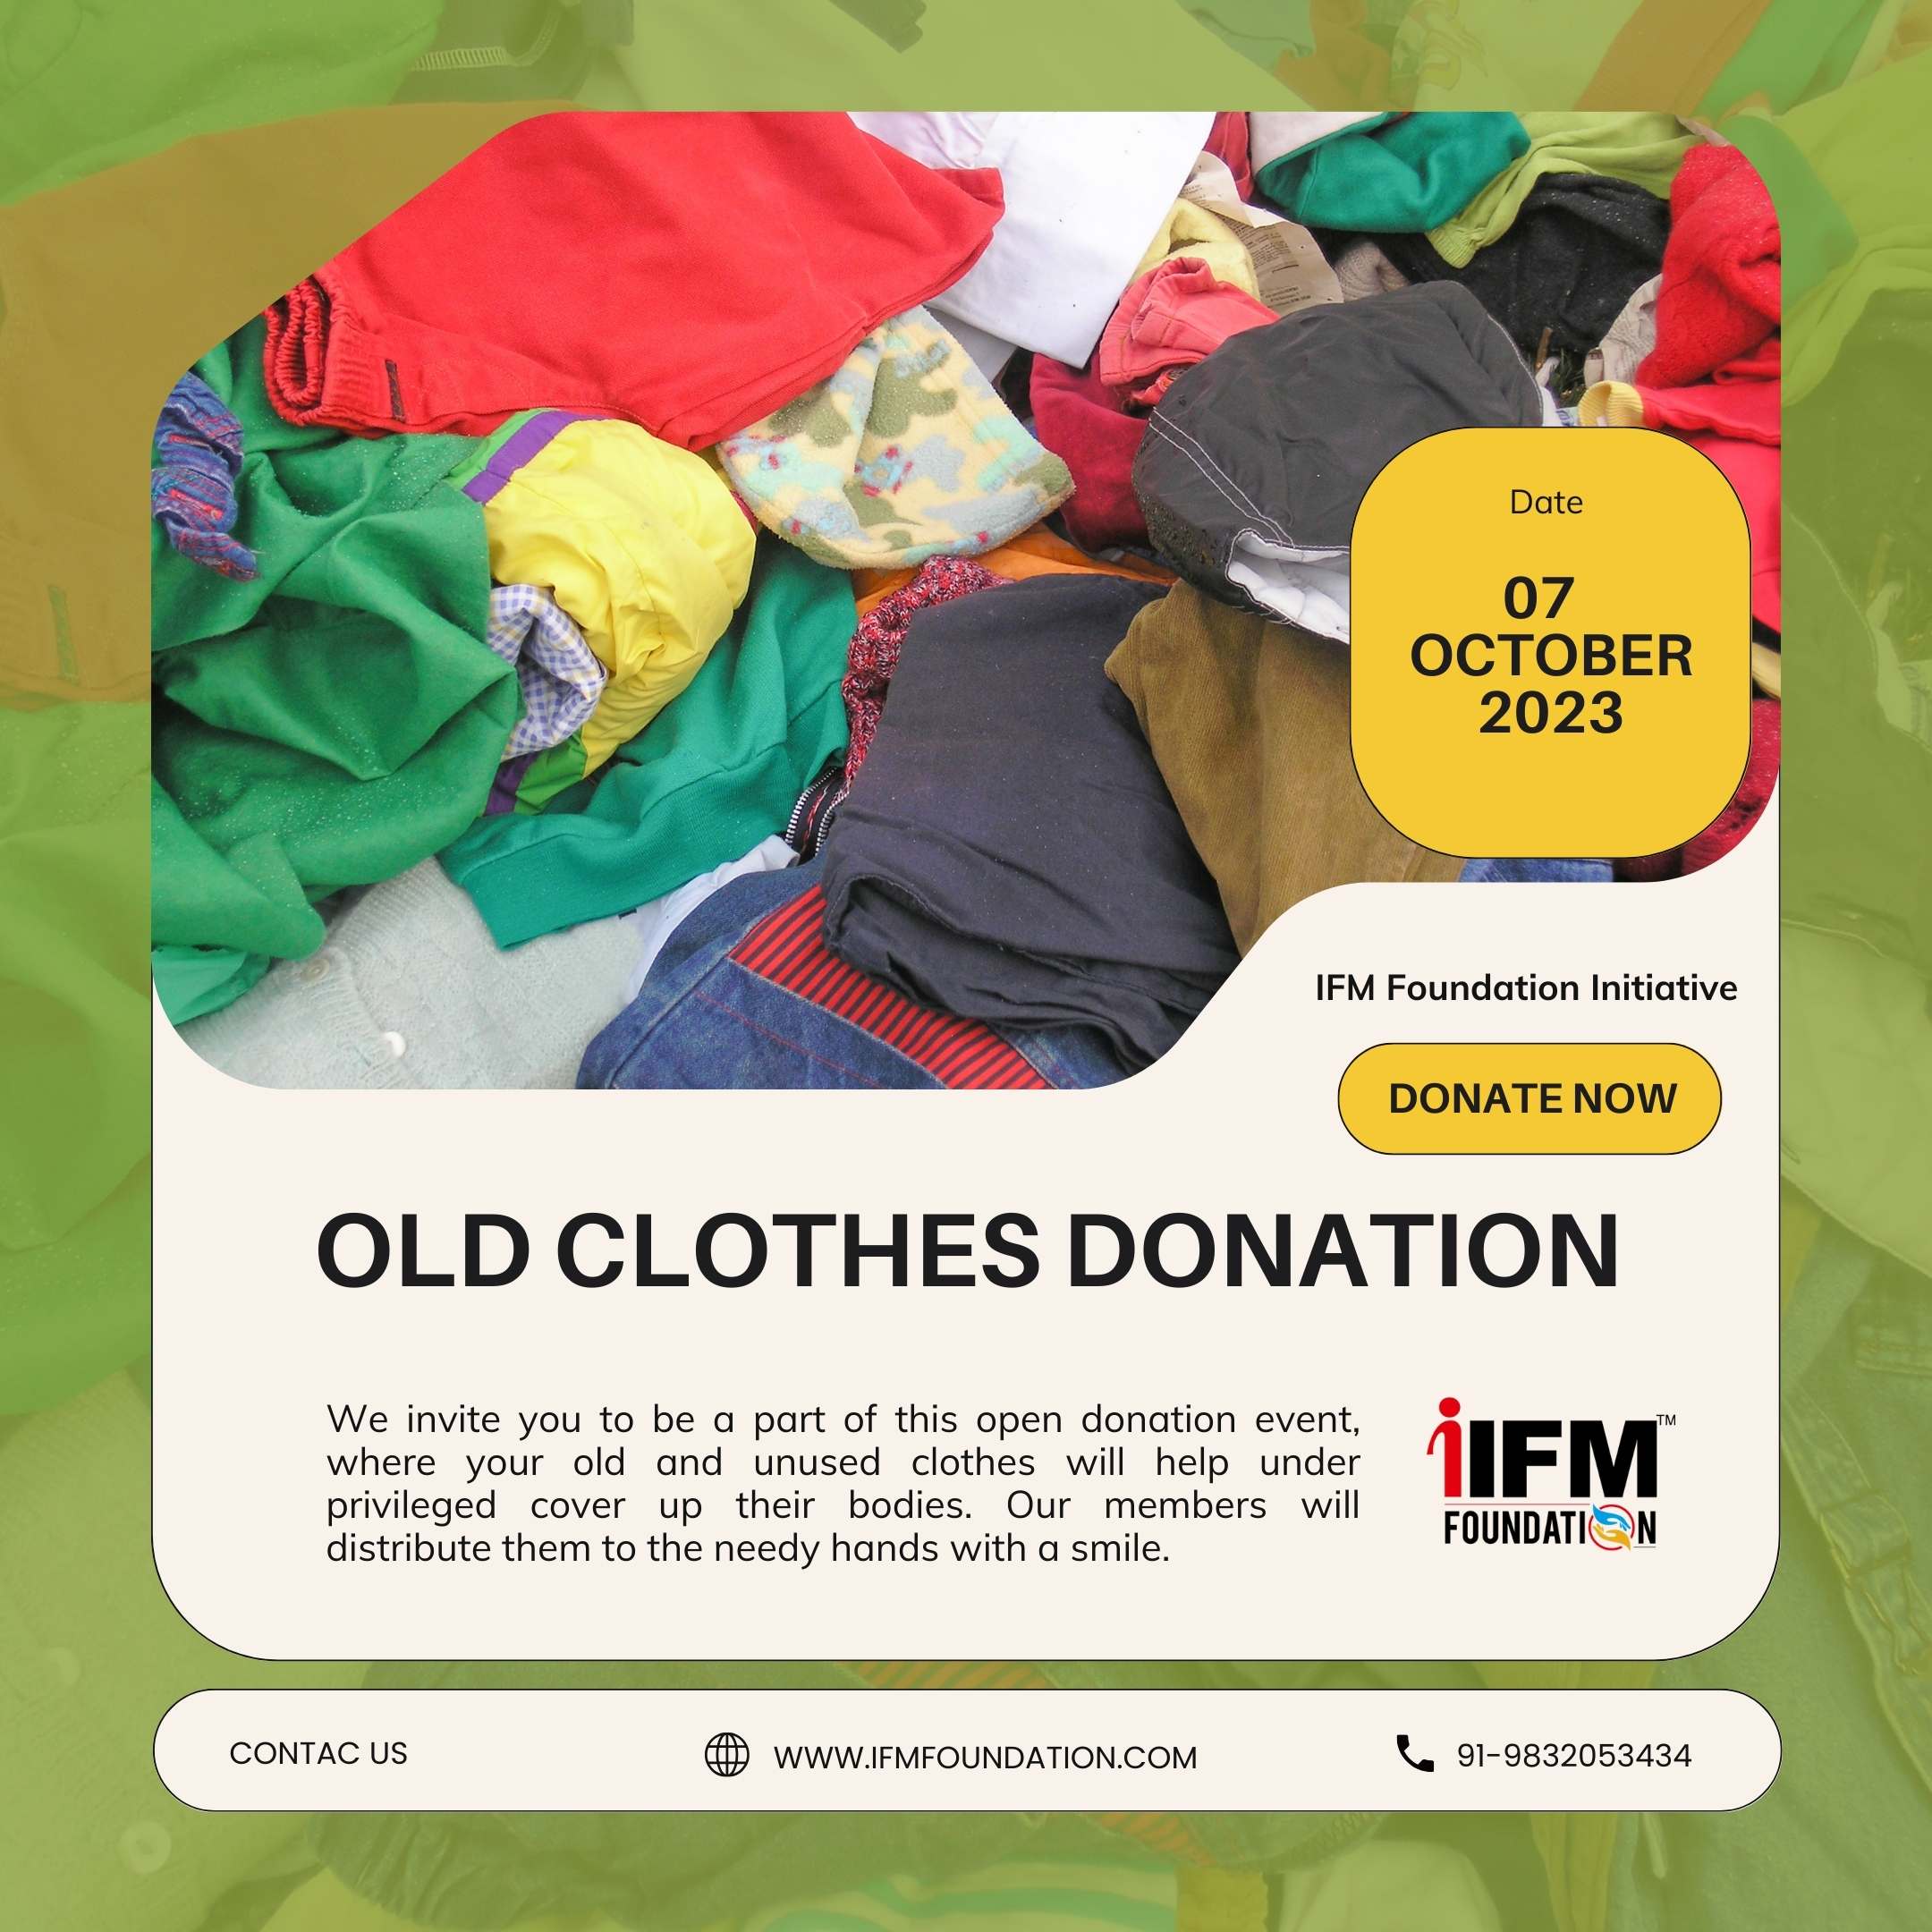 OLD CLOTHES DONATION